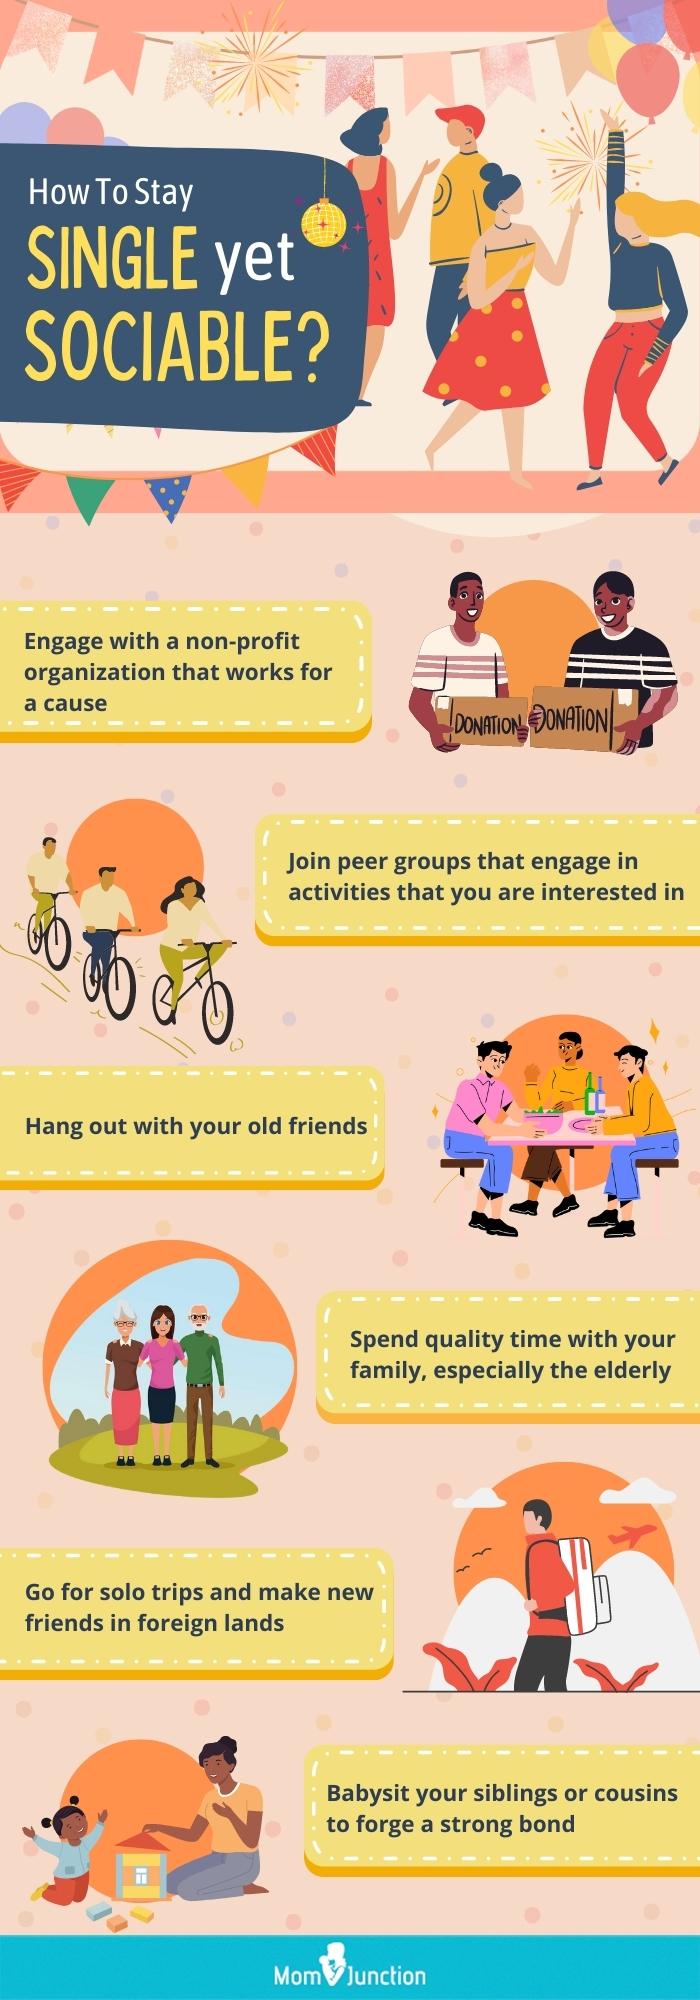 how to stay single yet sociable (infographic)